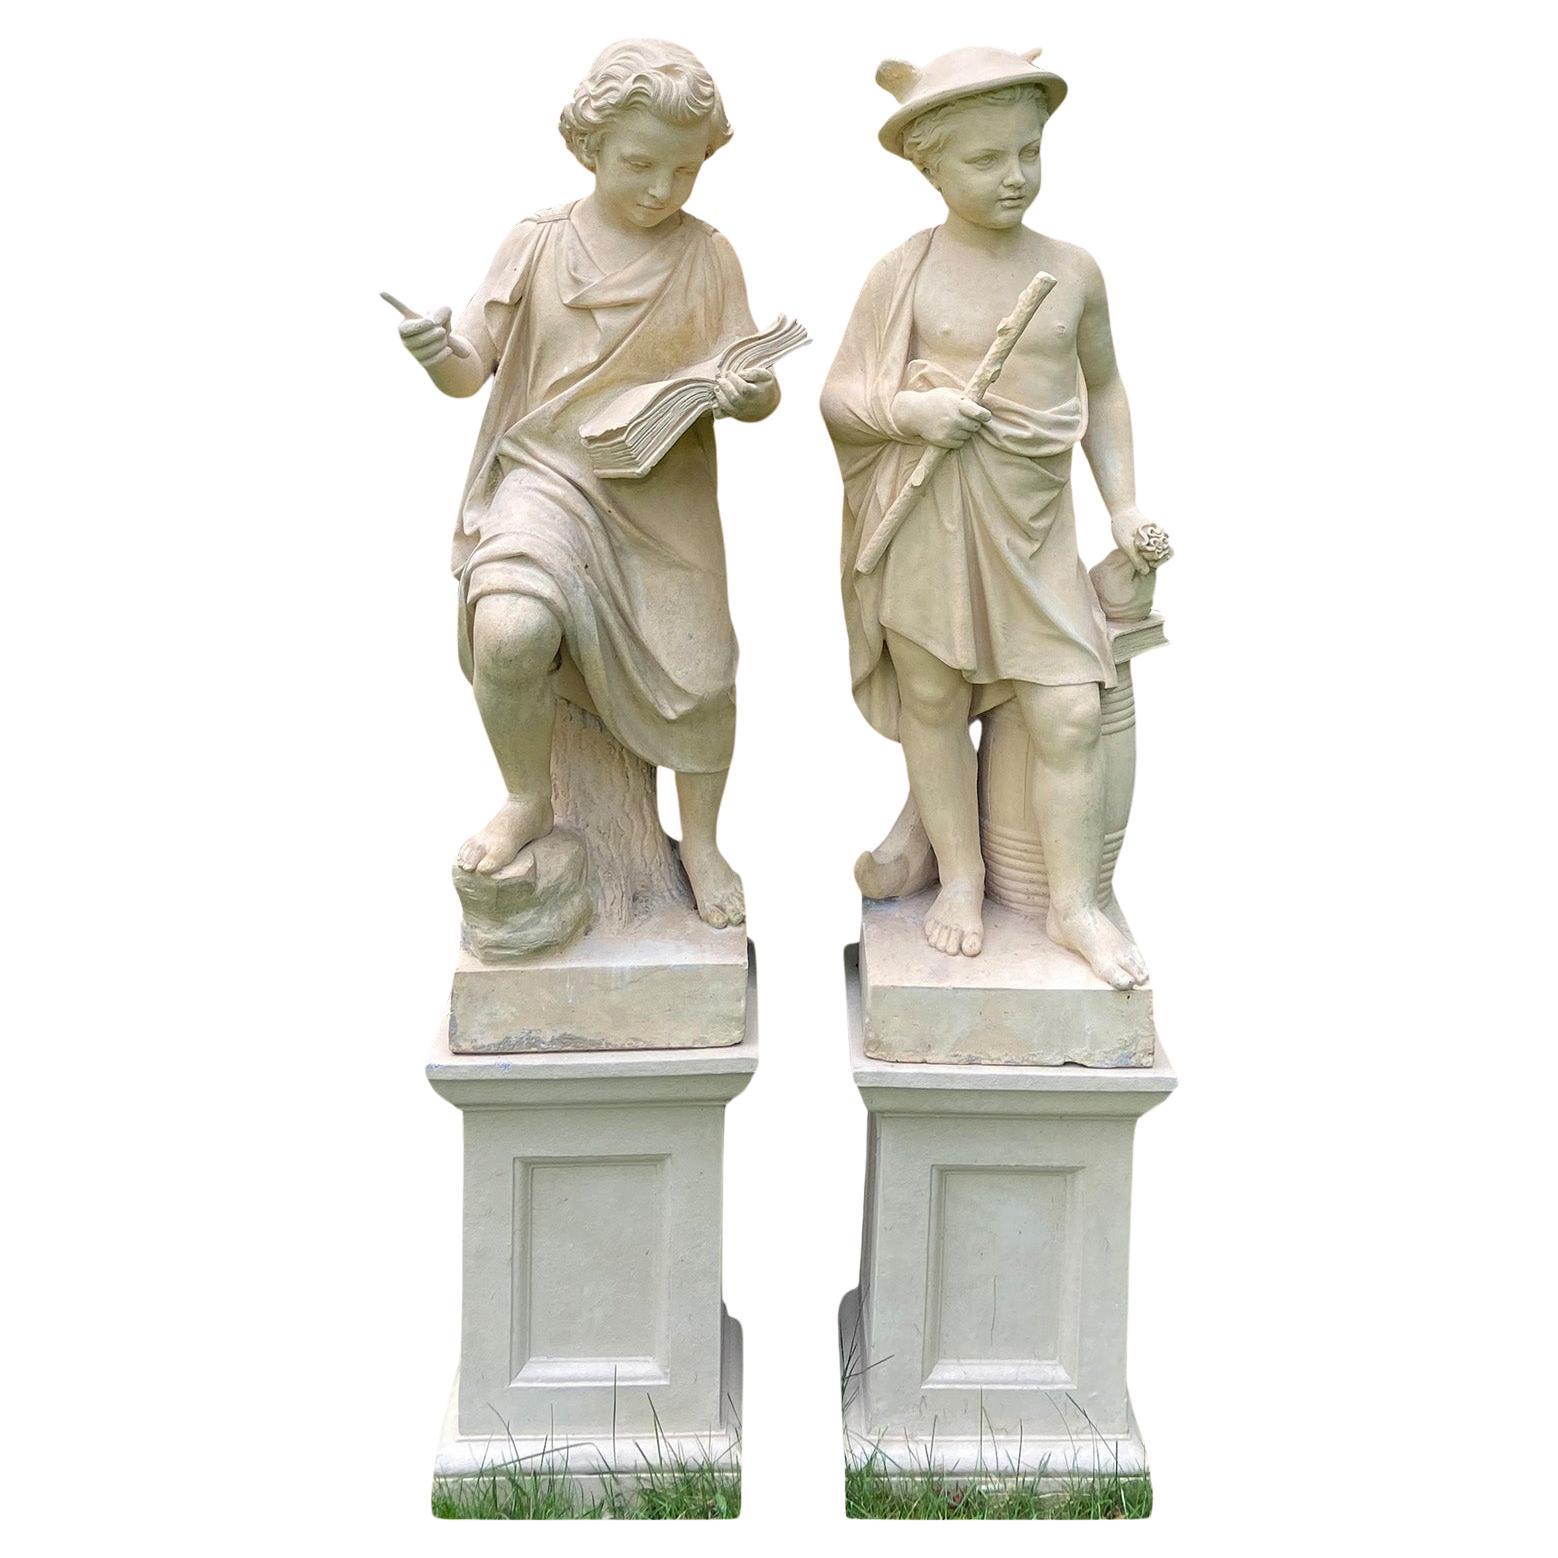 A Pair of Stoneware Statues of Commerce and Knowledge